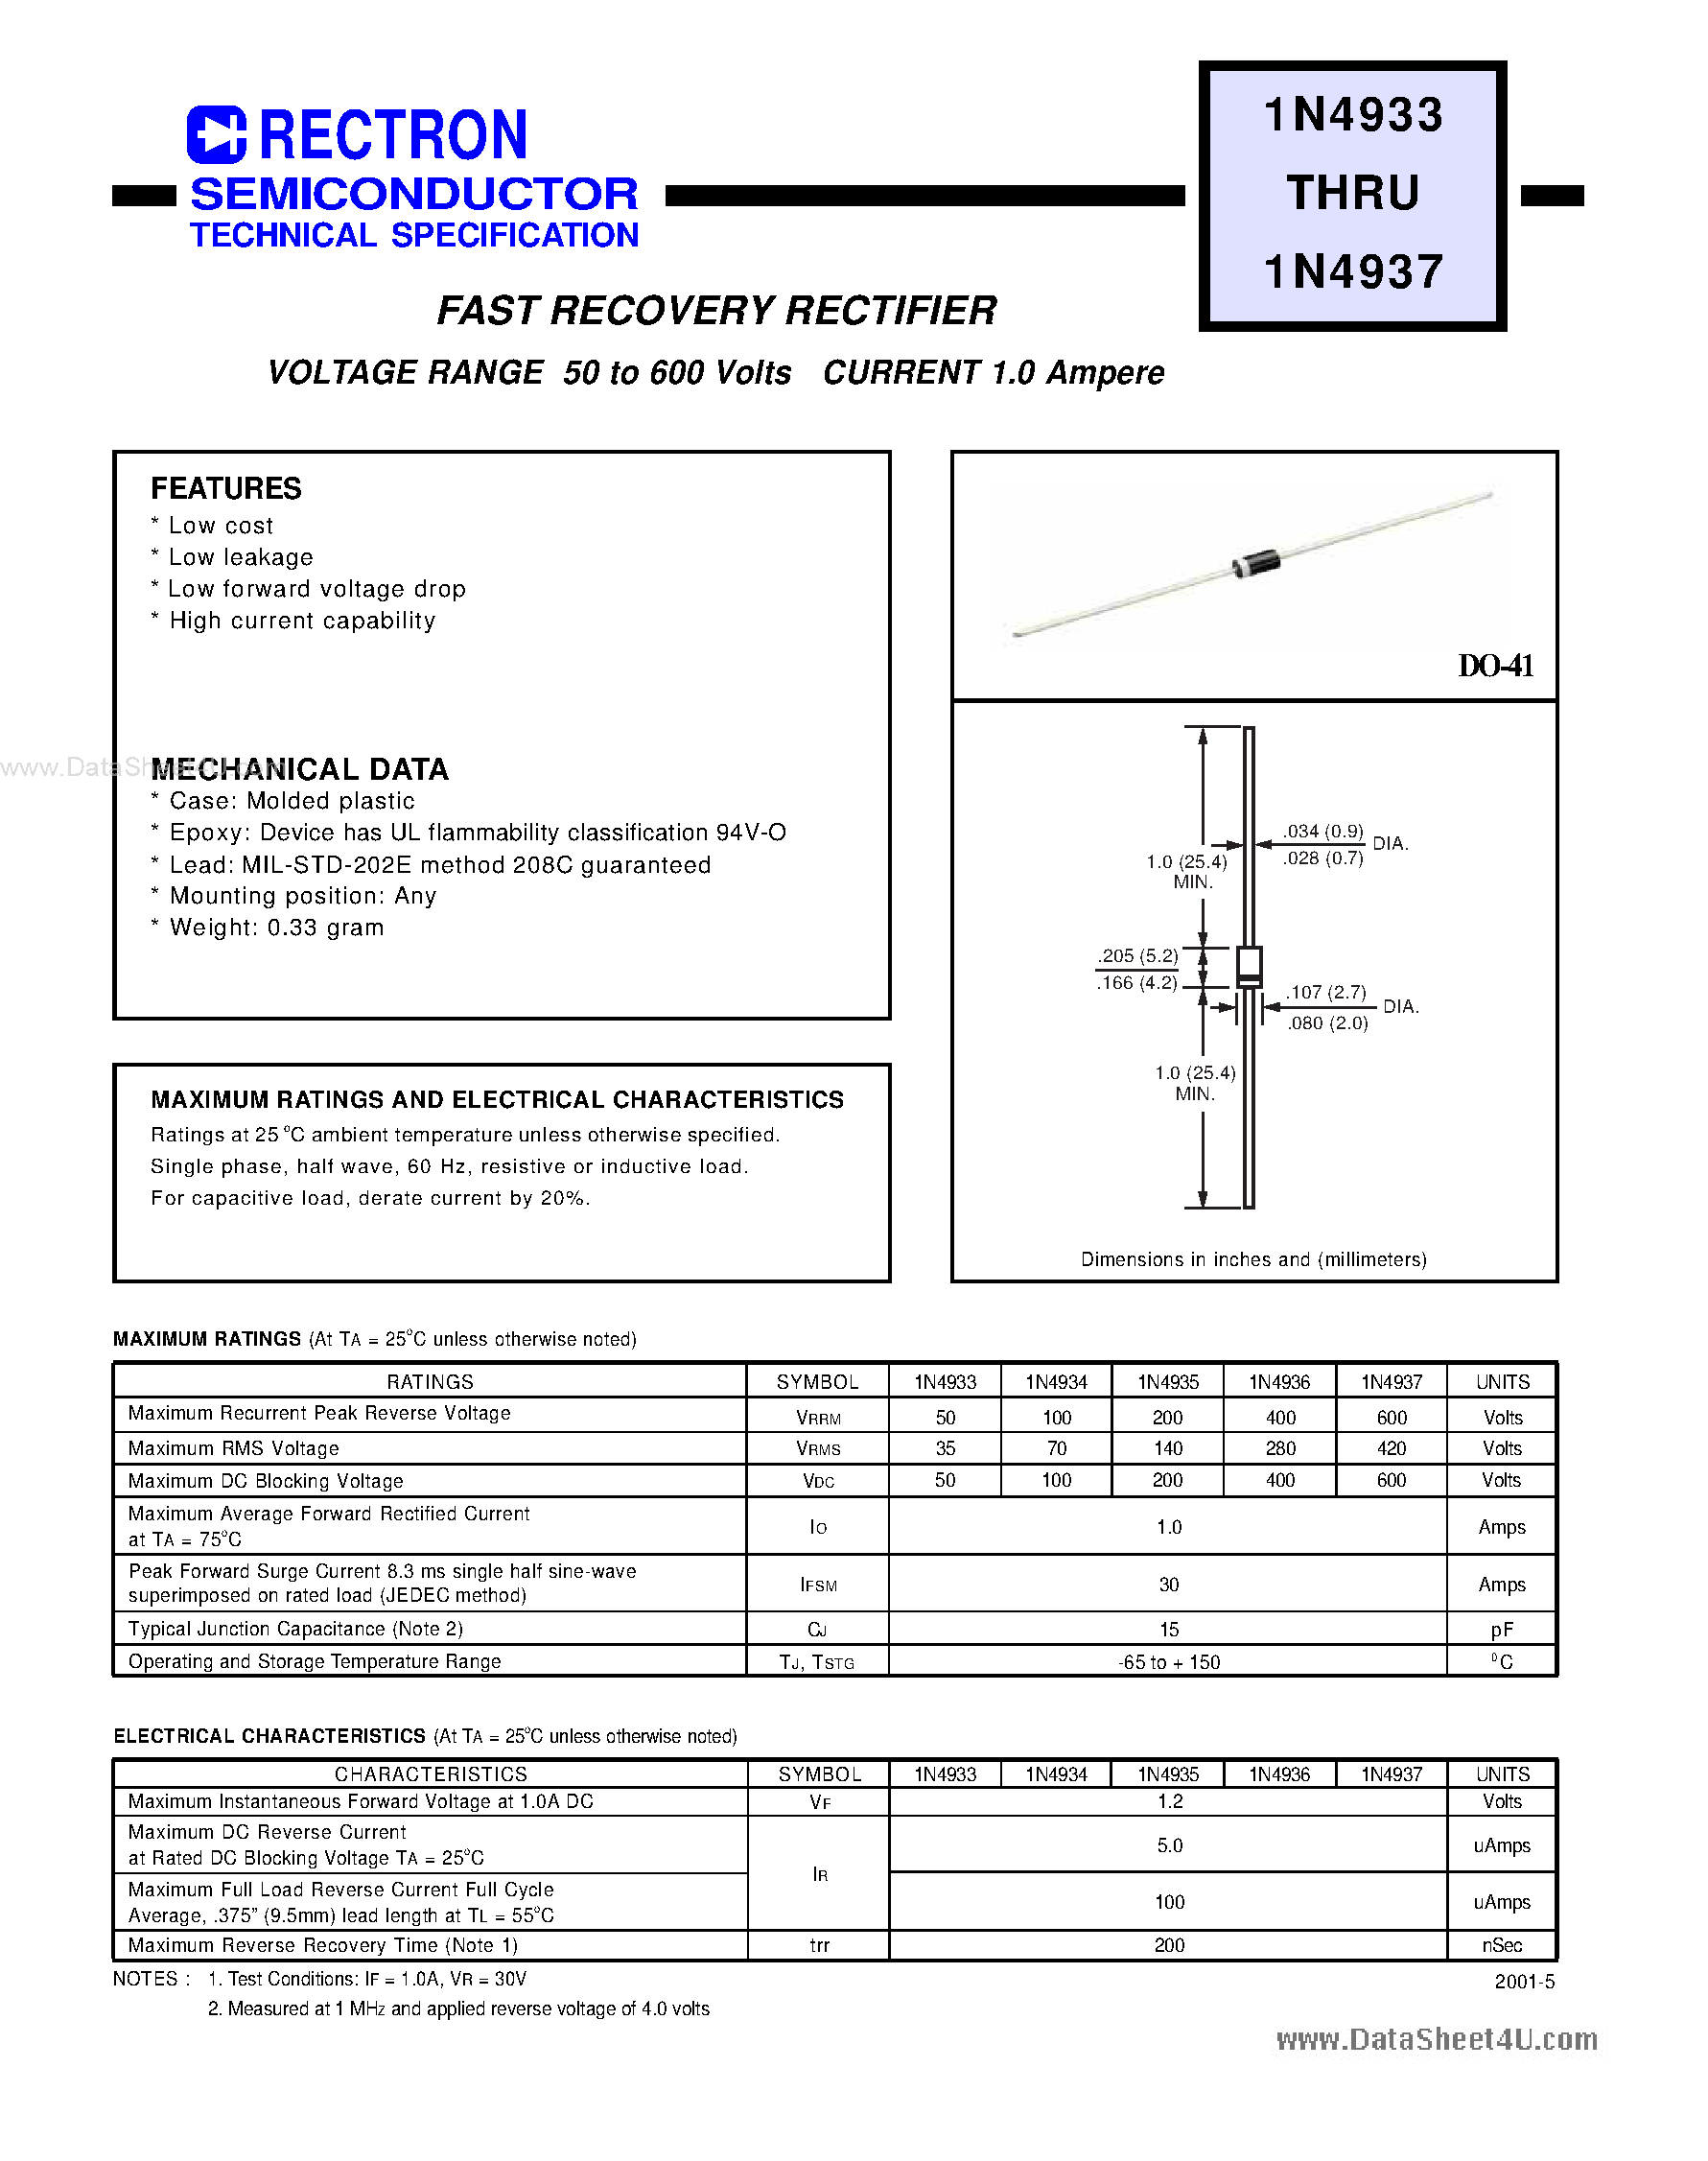 Datasheet IN4933 - (IN4933 - IN4937) FAST RECOVERY RECTIFIER page 1